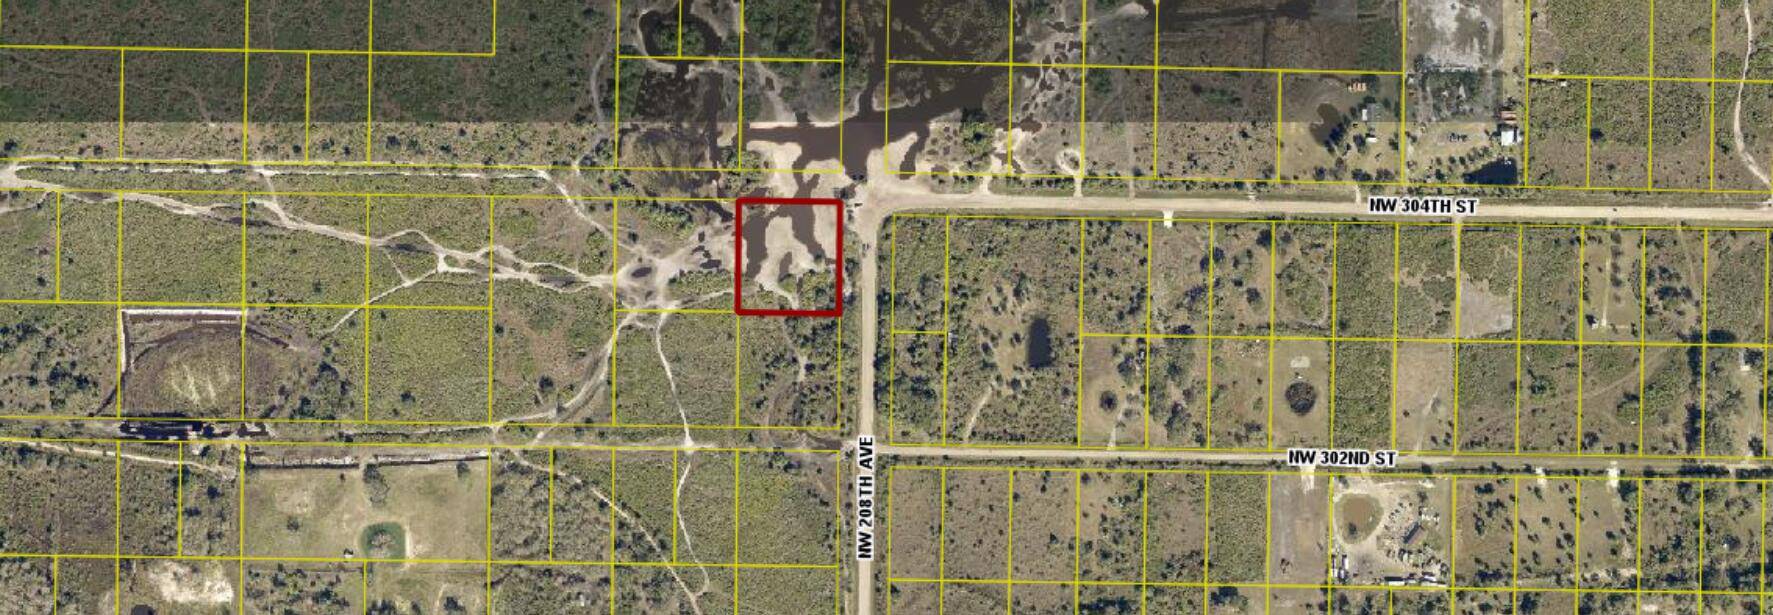 Discover the potential of The Prairie in Okeechobee, Florida, through this vacant land awaiting its next owner.